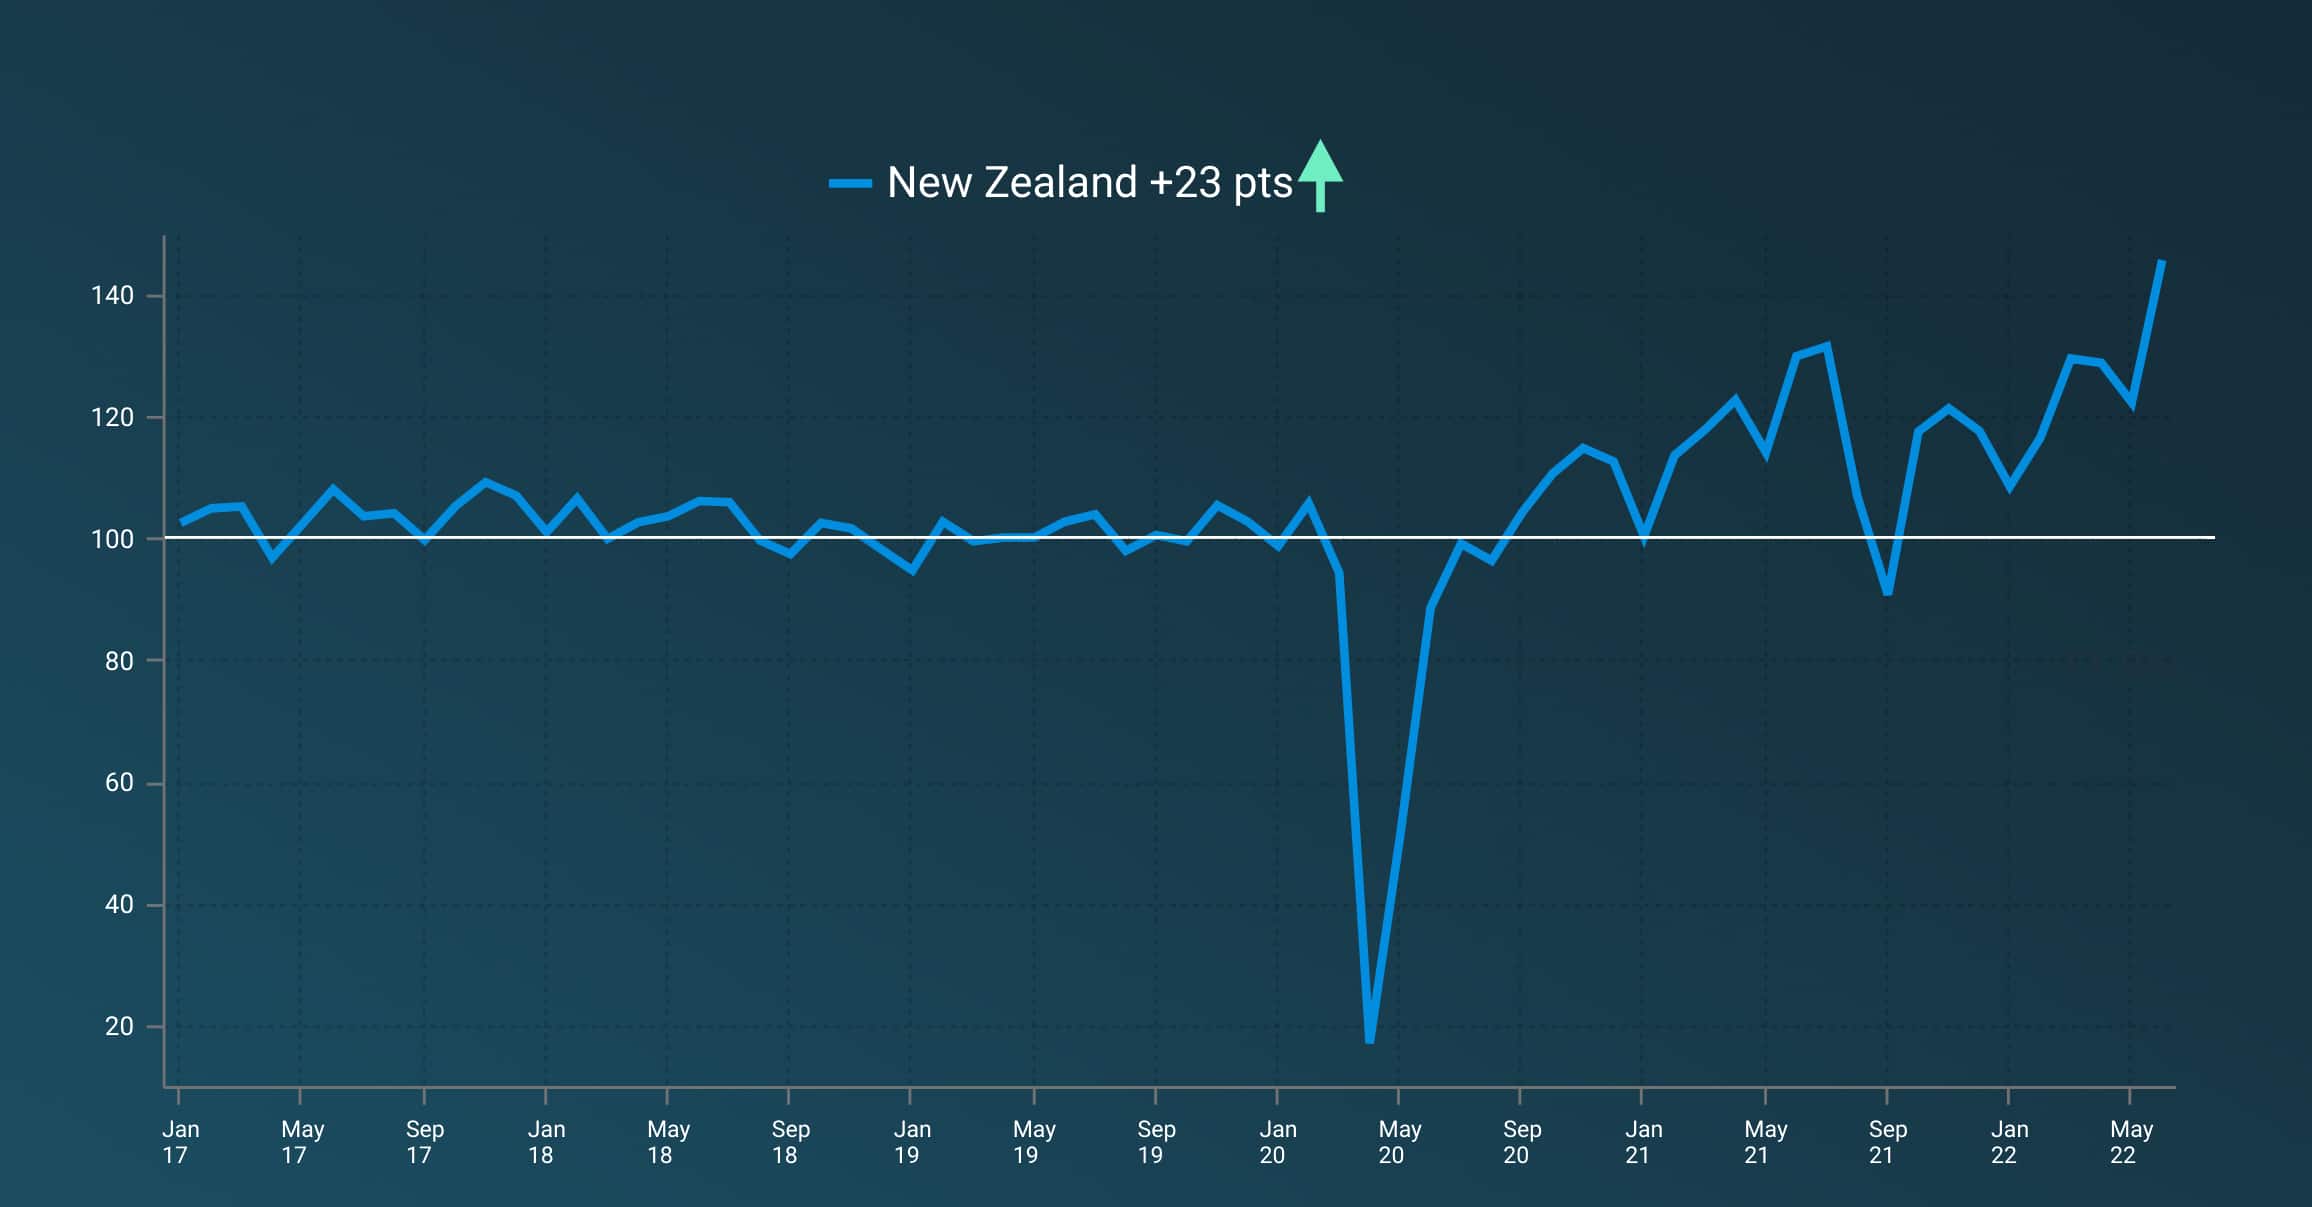 A line graph showing the ups and downs in the New Zealand Small Business Index since January 2017.